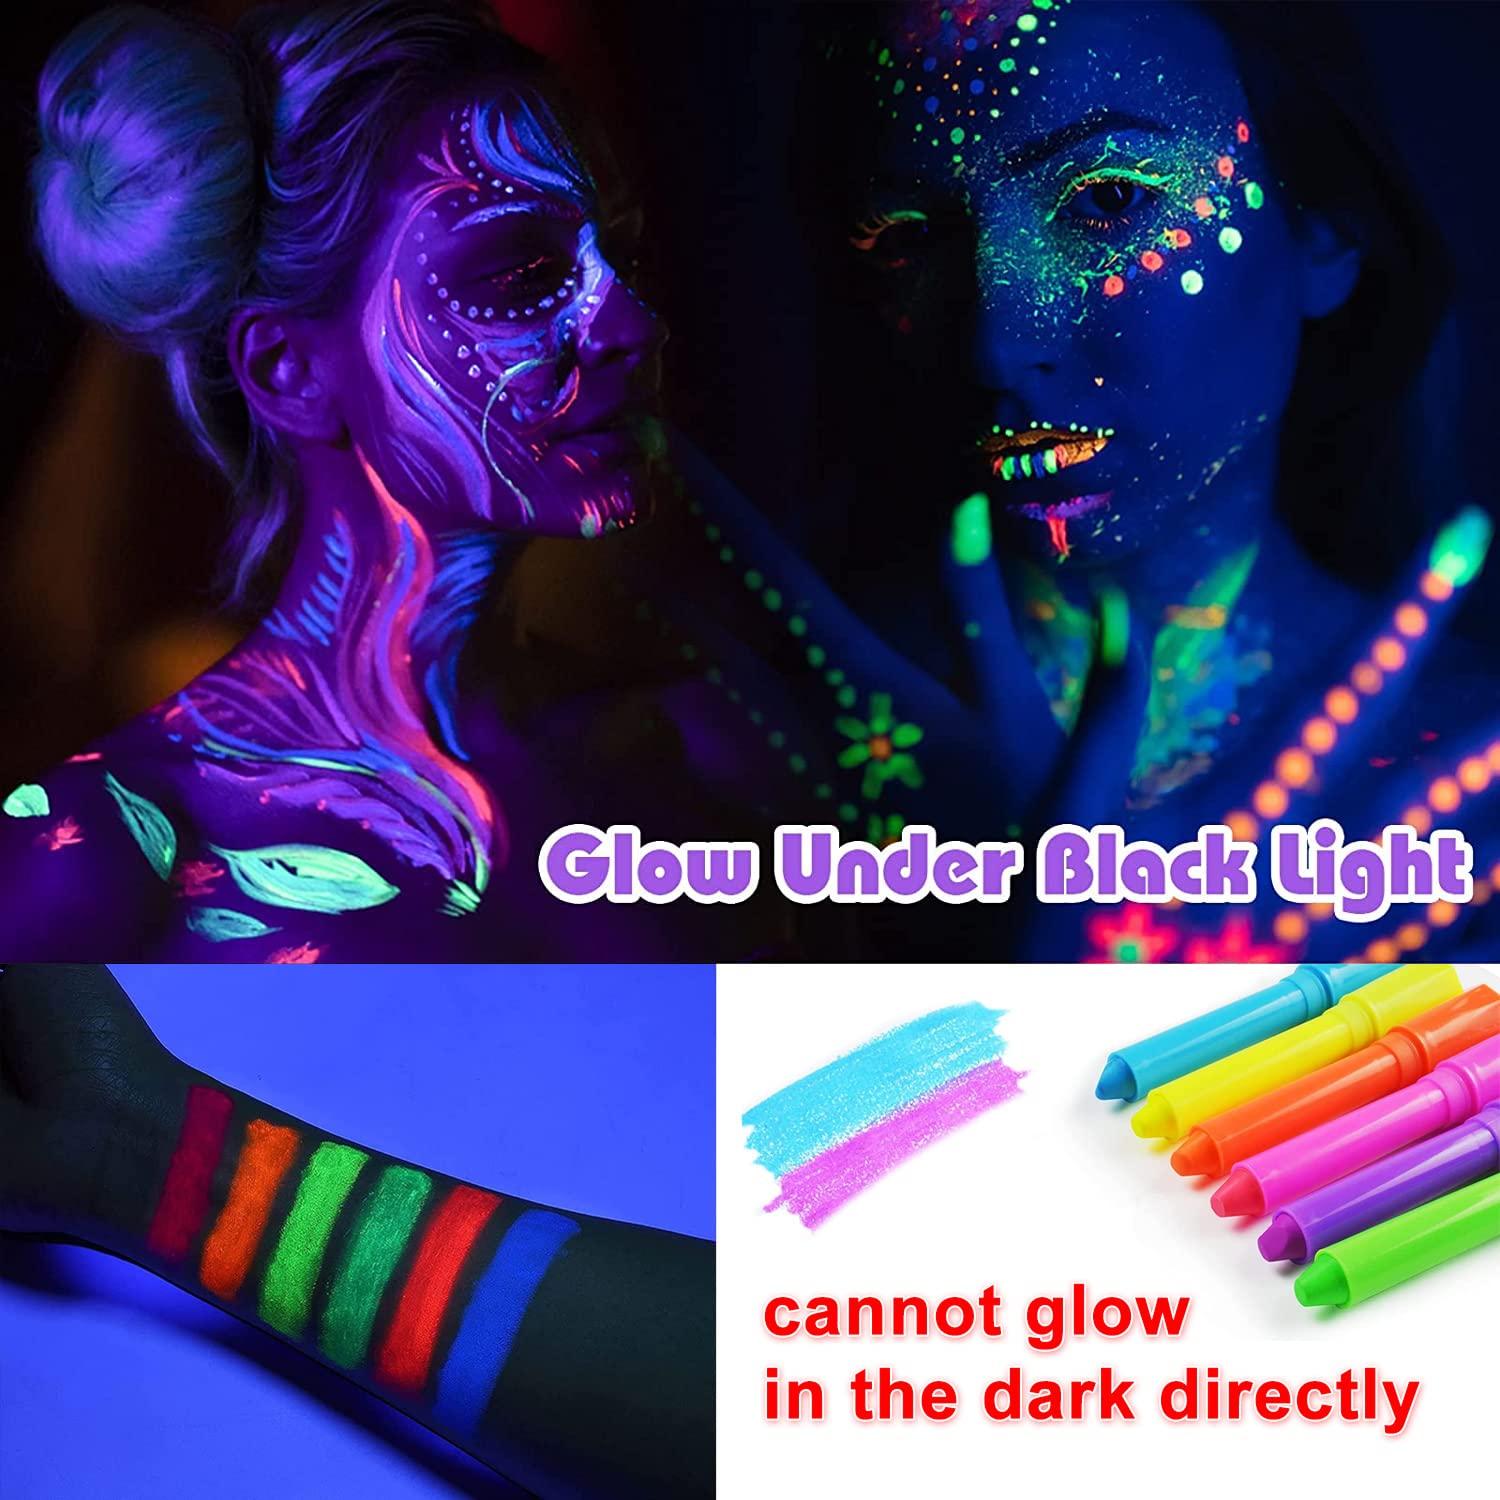 12 Pieces Glow Blacklight Face & Body Paint Makeup, Glow in The Dark Face  Painting Kit Neon Paint Sticks for Kids Adult Halloween Glow Party